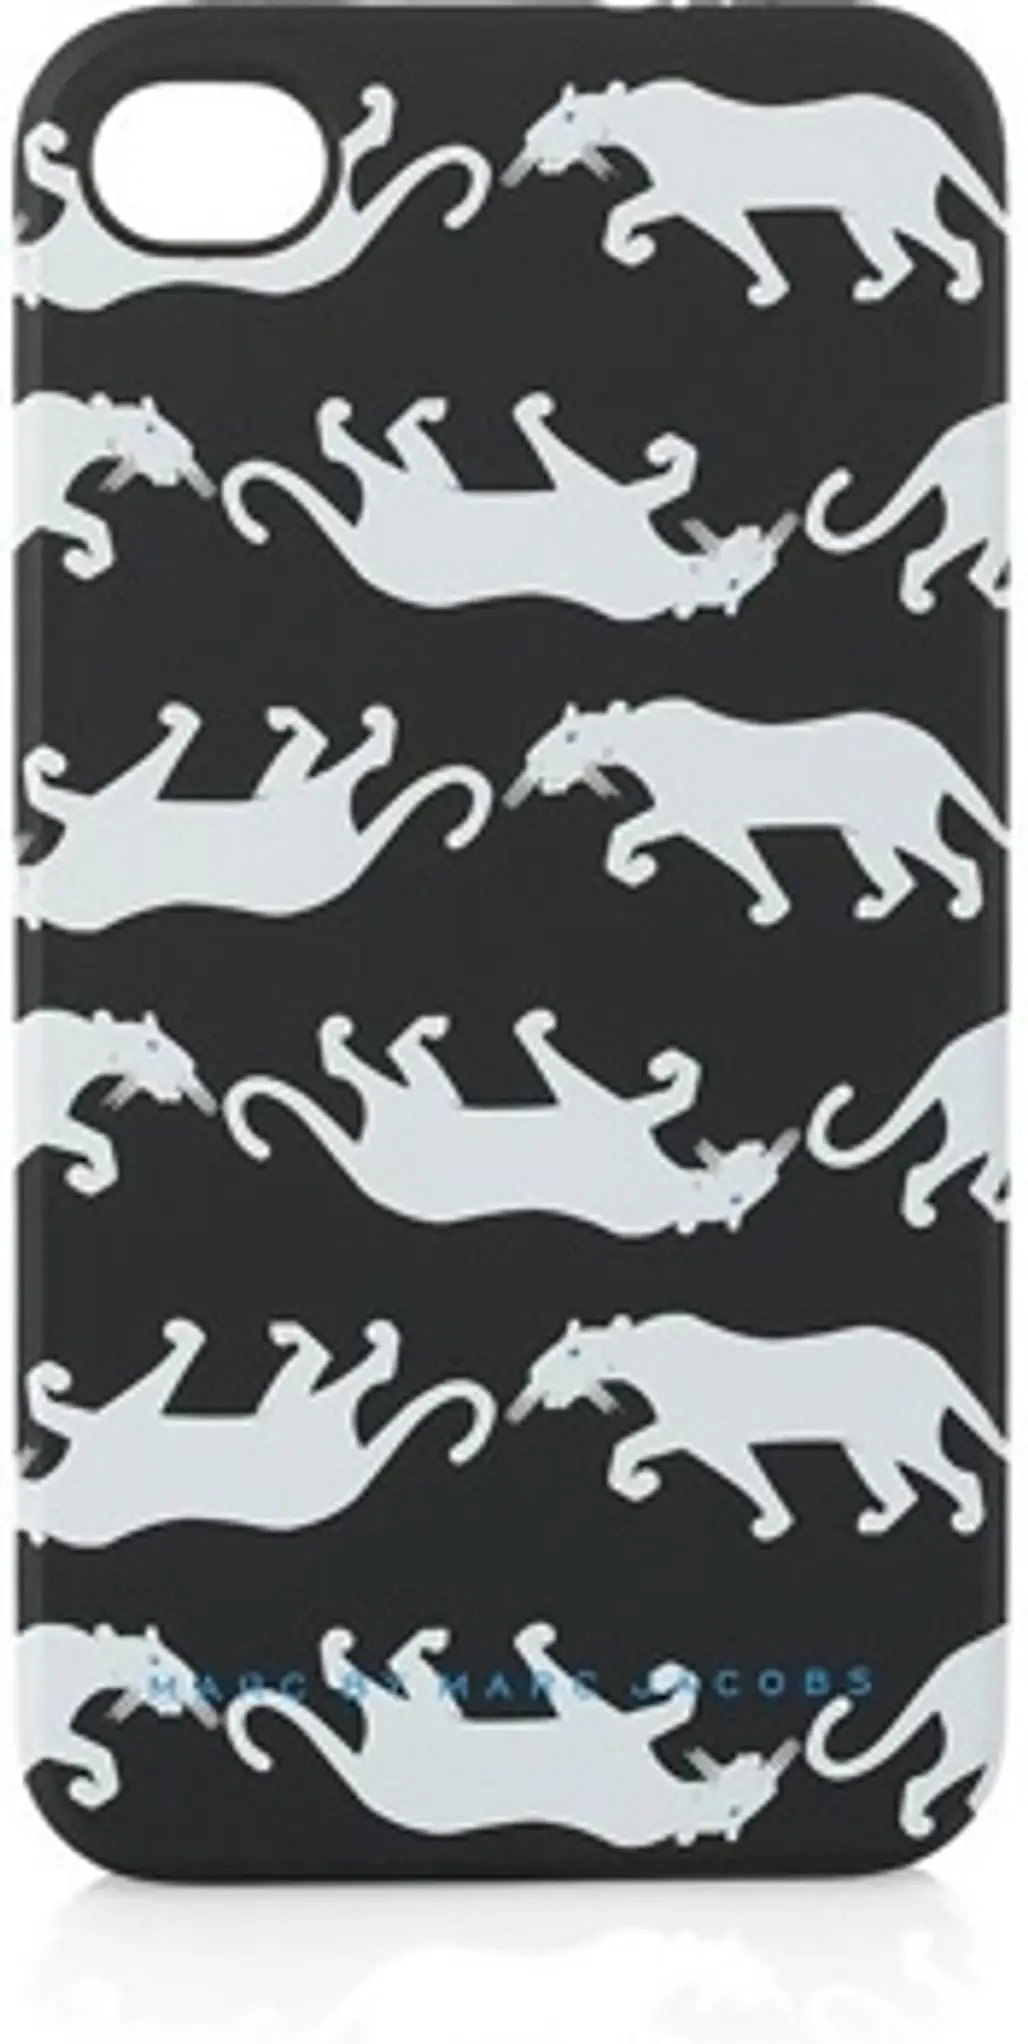 Marc by Marc Jacobs Panther IPhone 4G Case